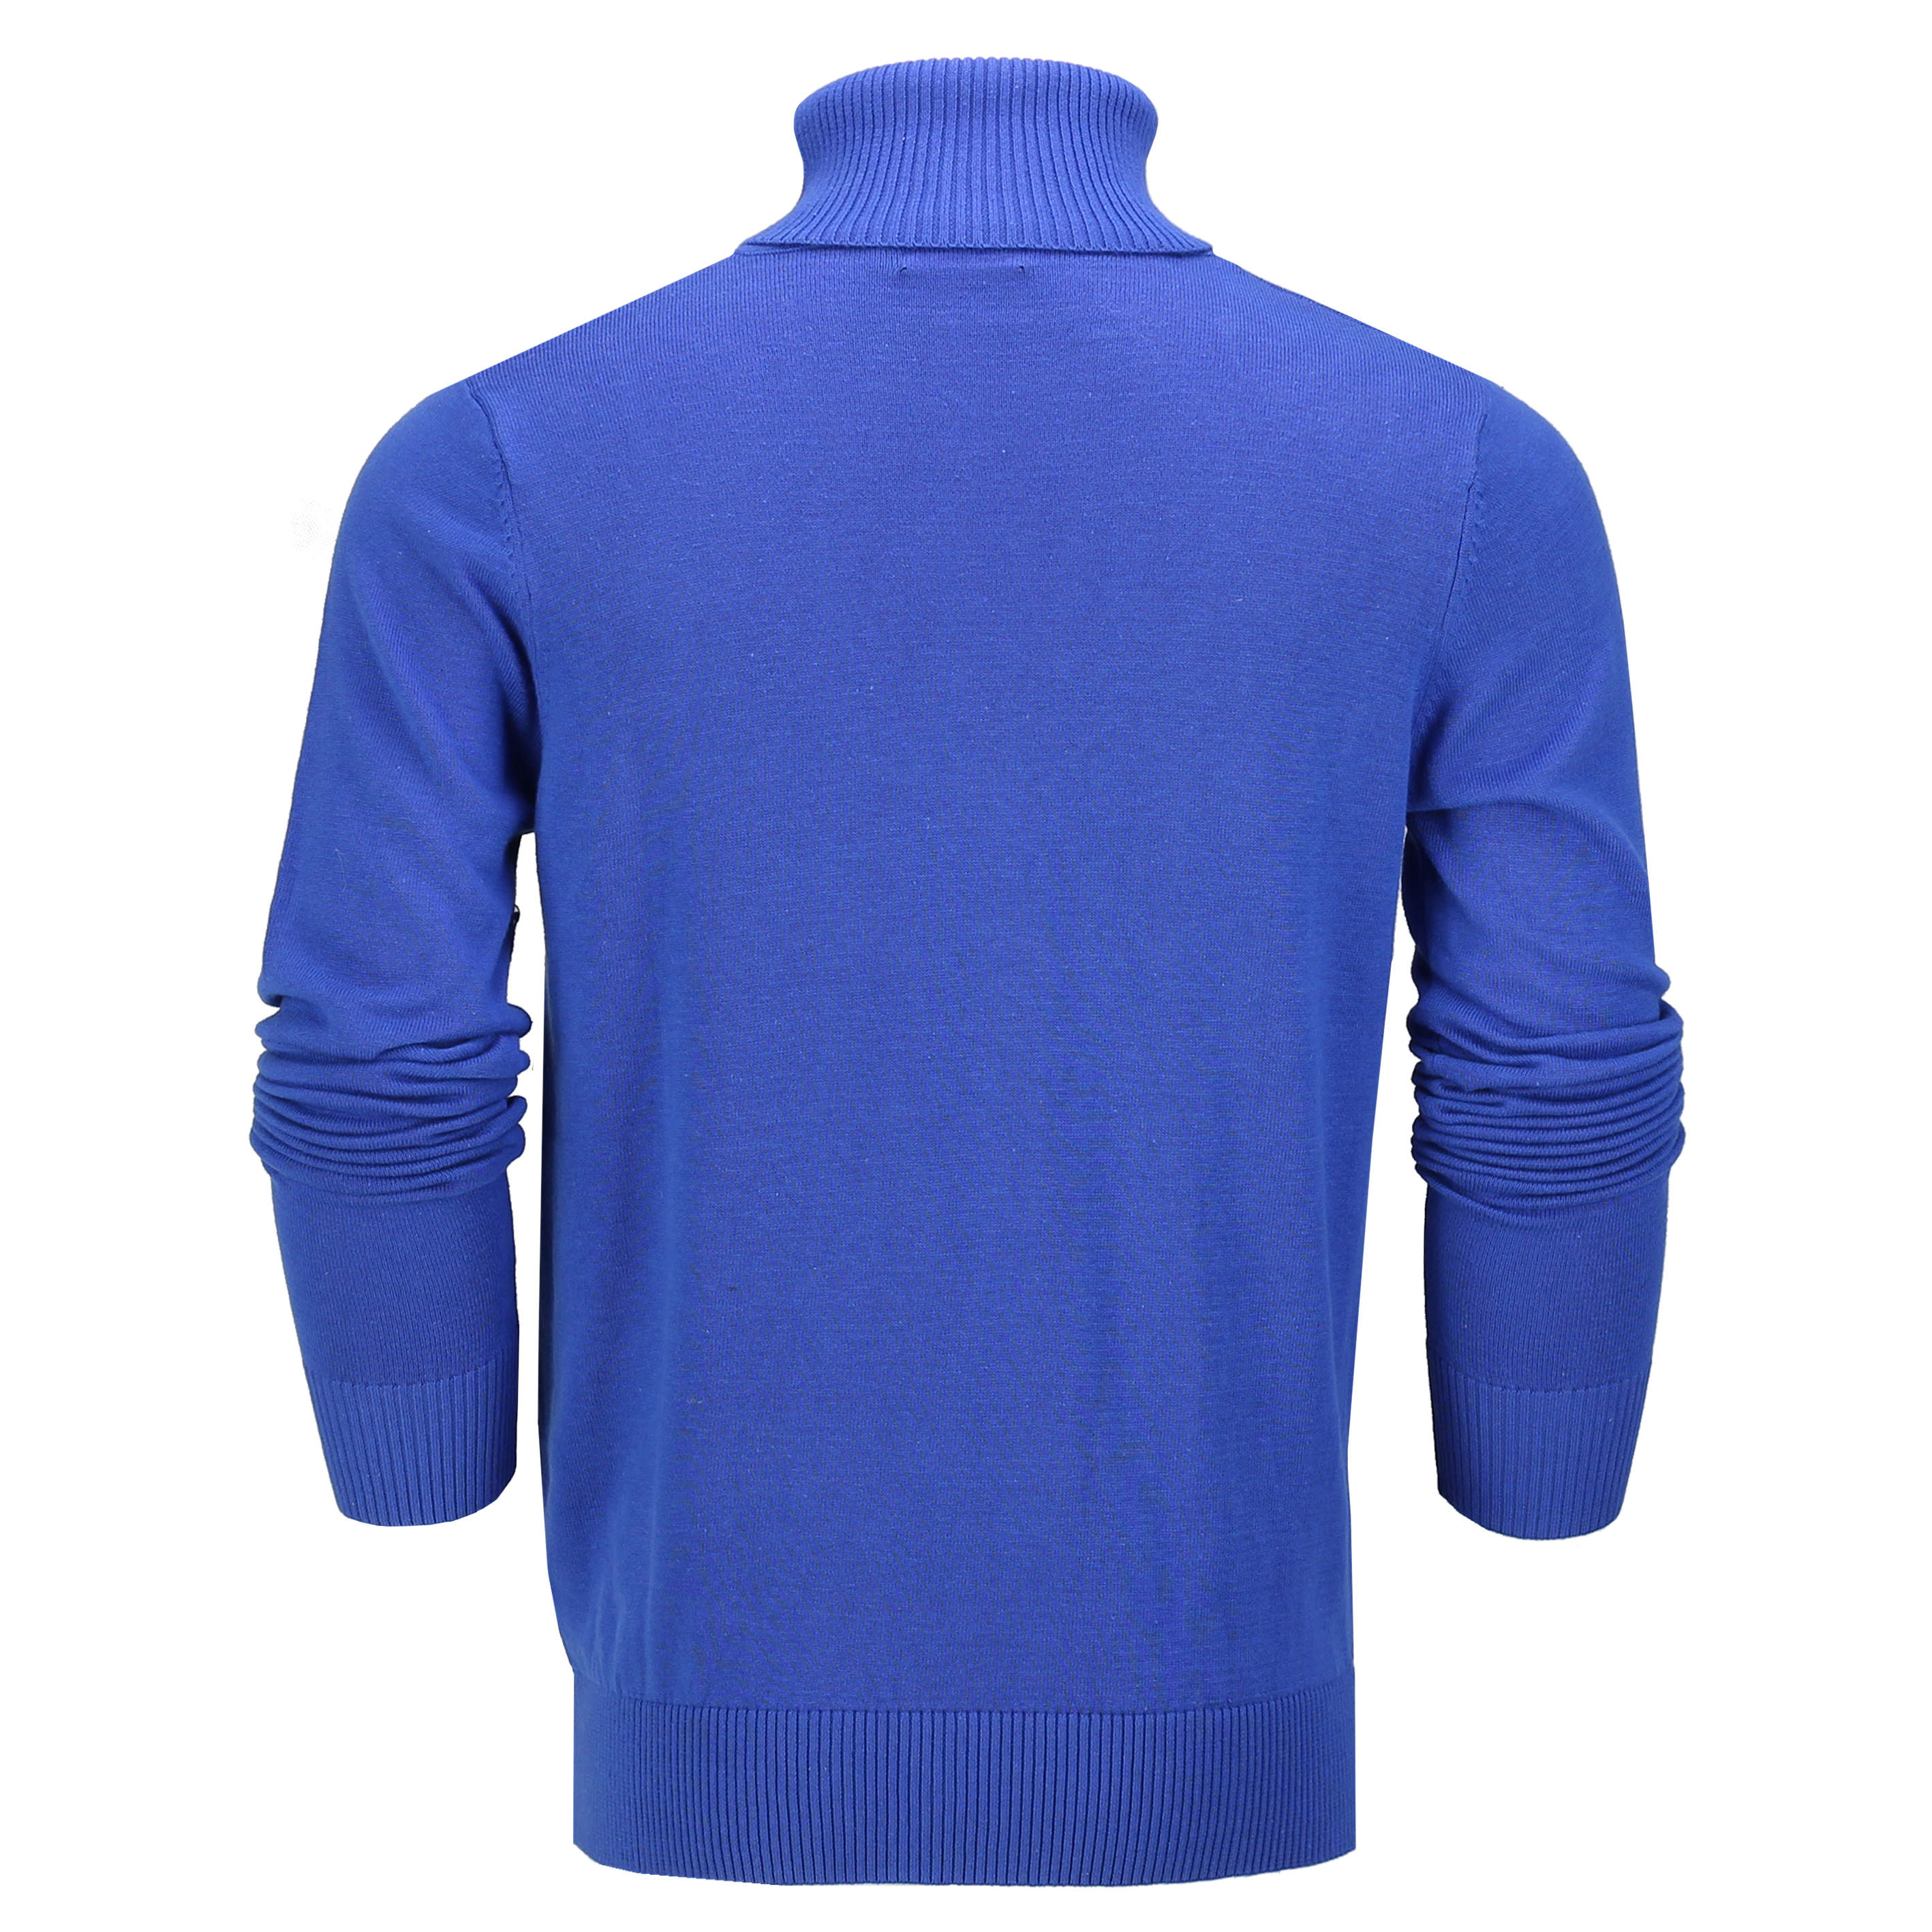 Mens Roll Neck Royal Blue Jumper Soft Cotton Fine Knitted